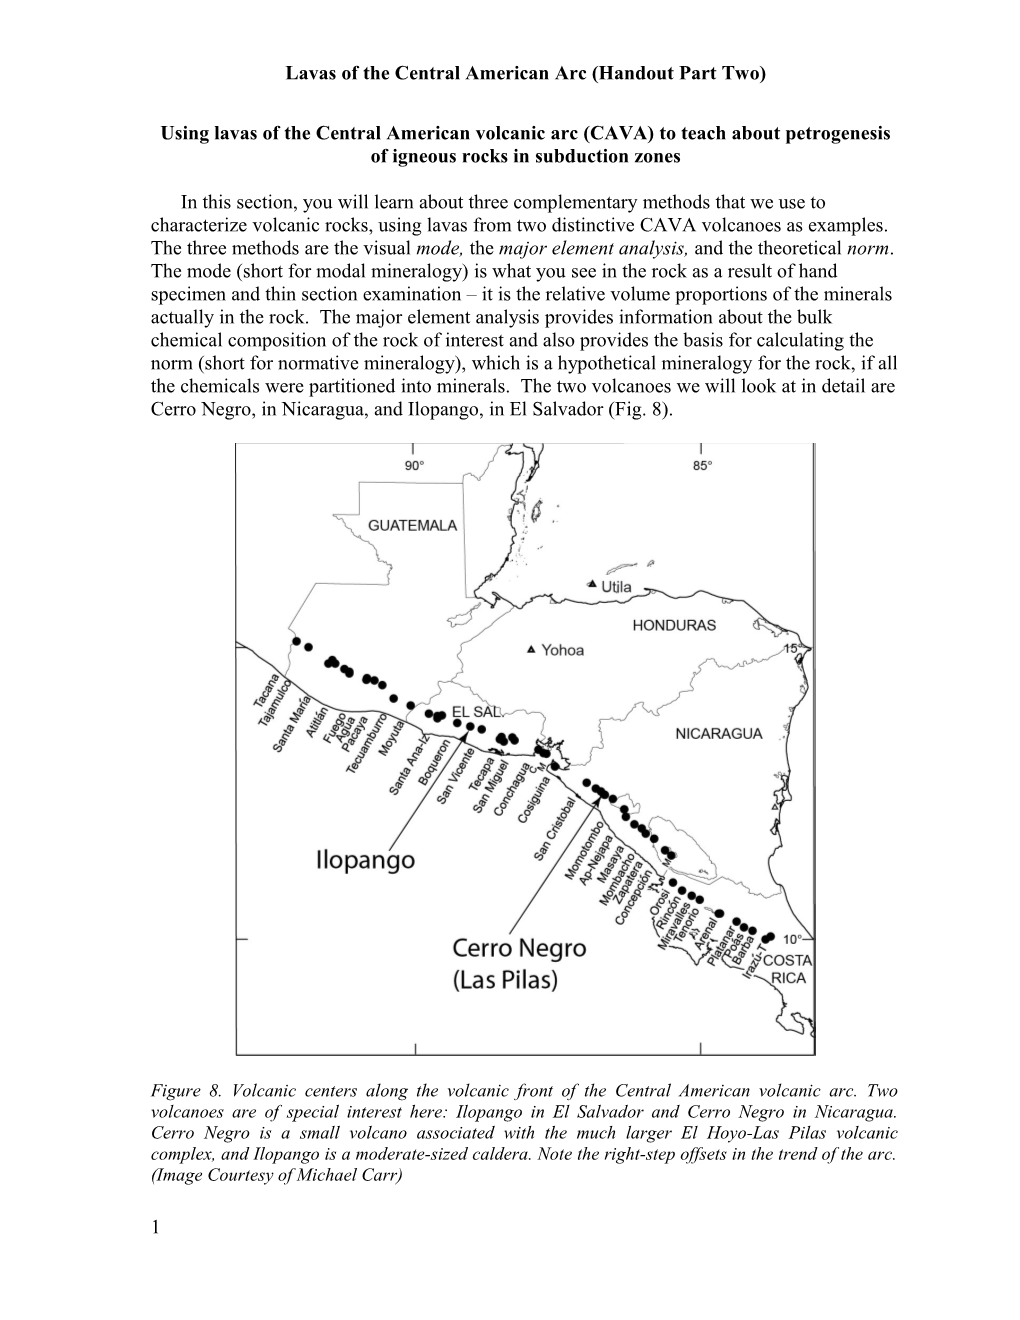 Margins Mini Lesson: Volcanoes and Lavas of Central America